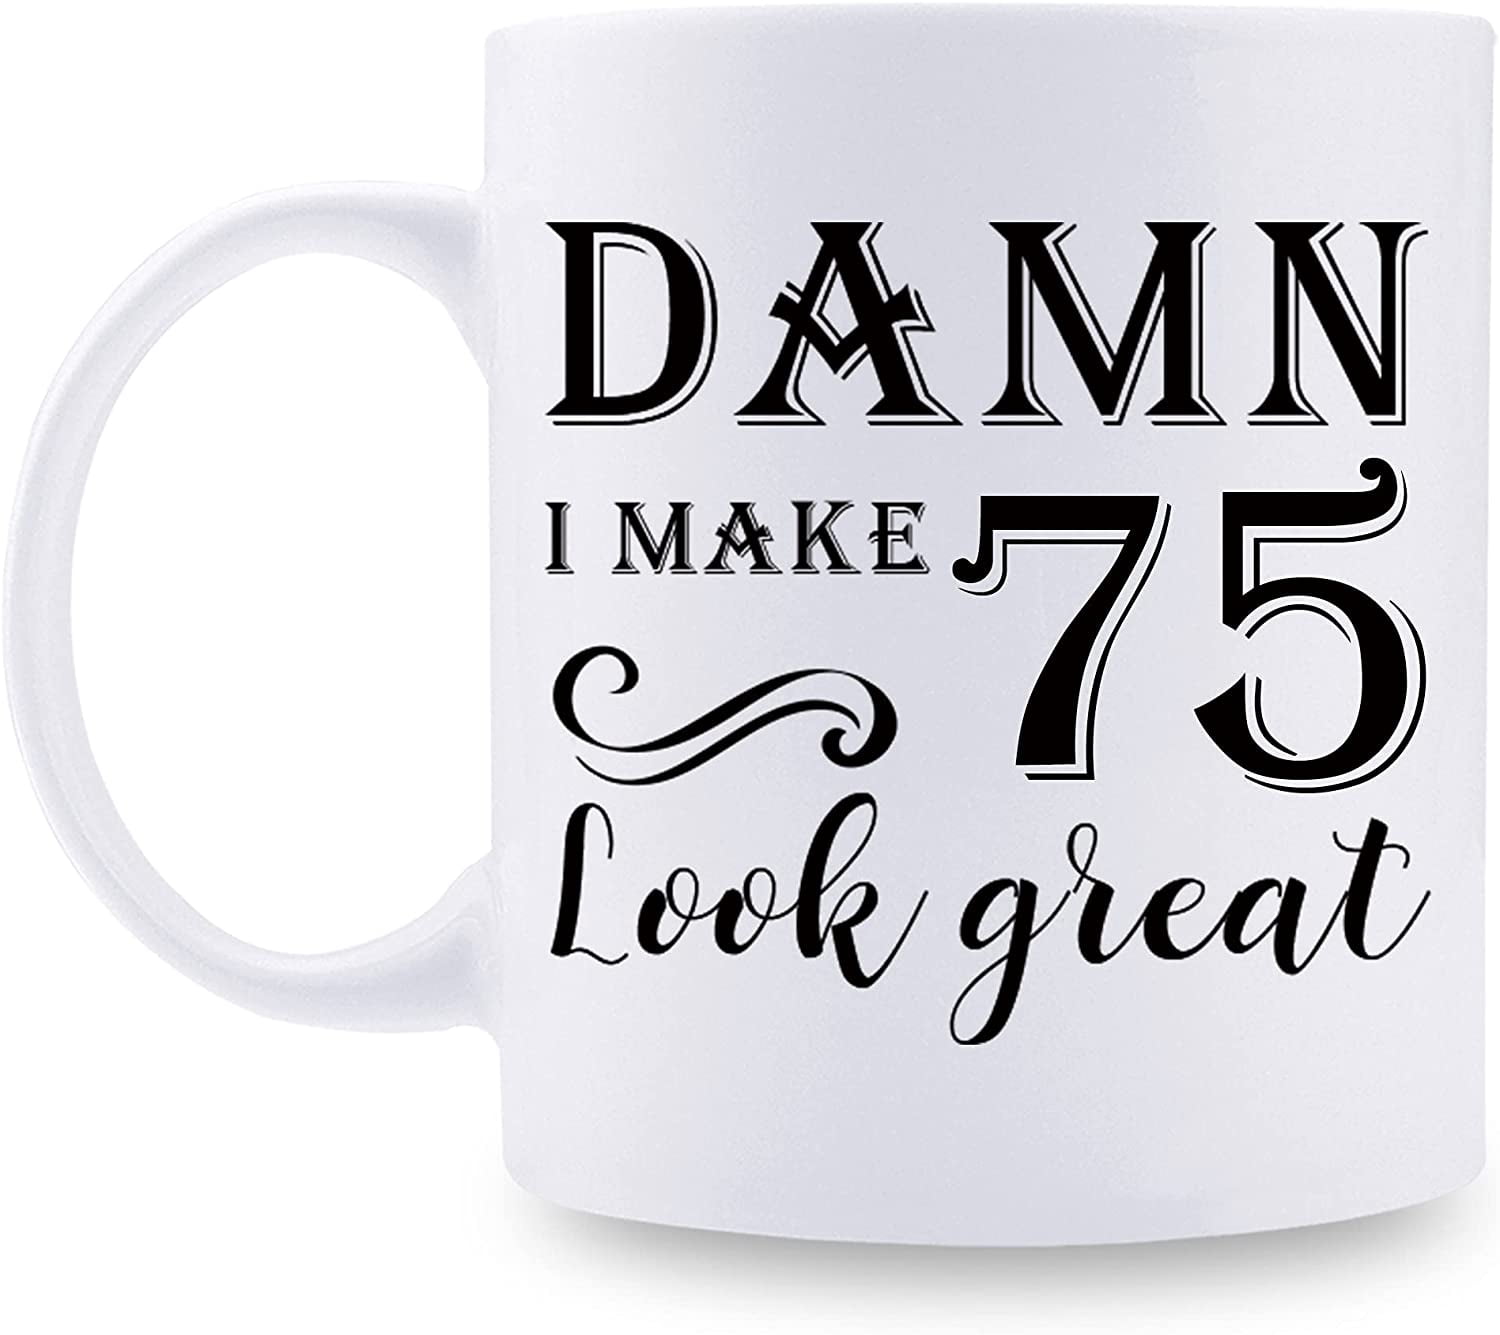 38 Great Gifts for Senior Men – DailyCaring